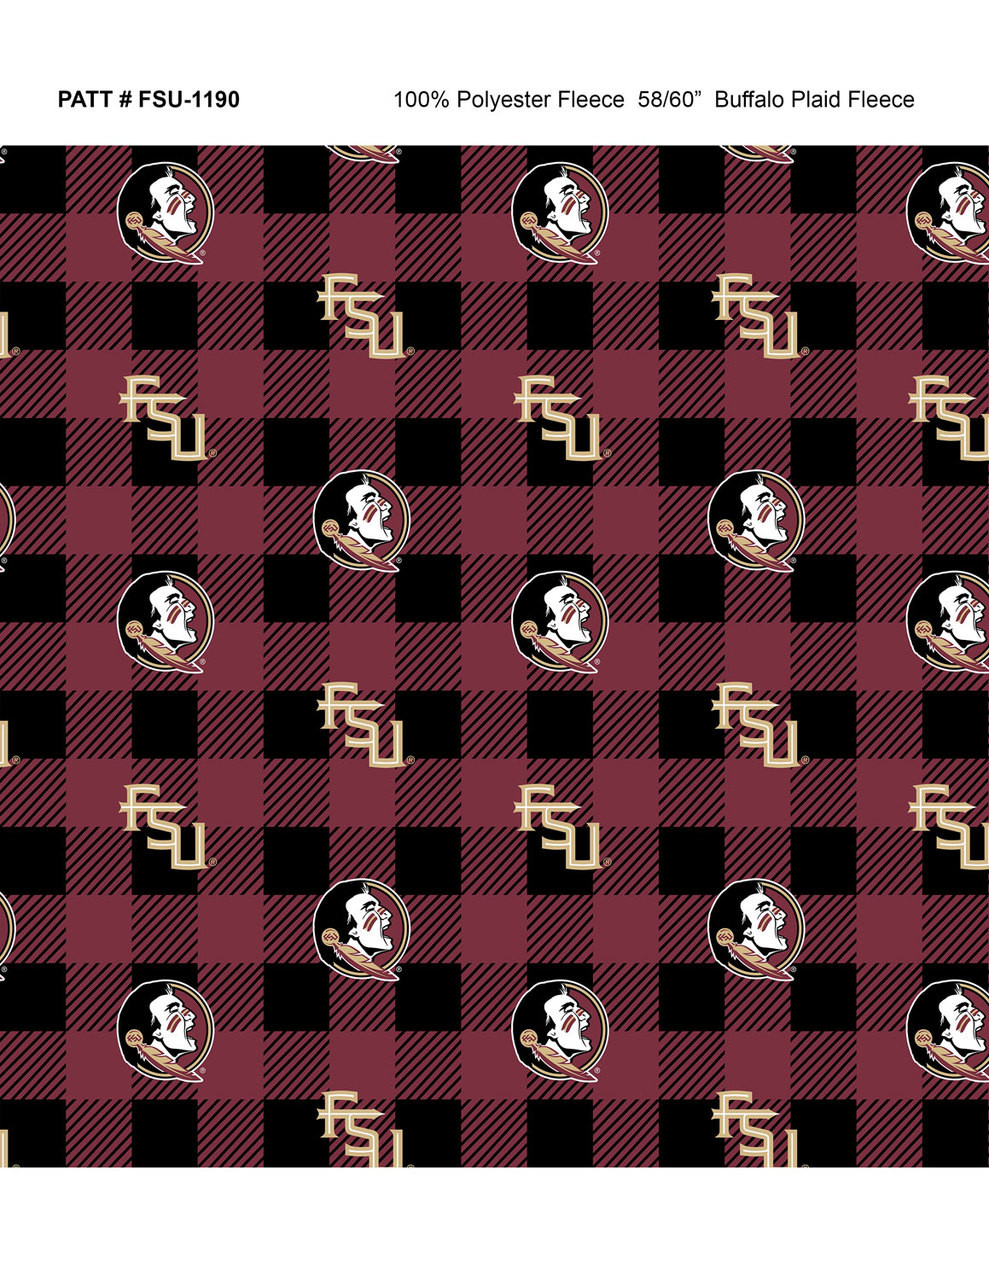 Florida State Seminoles Tide Fleece Fabric with Buffalo Plaid design-Sold by the Yard